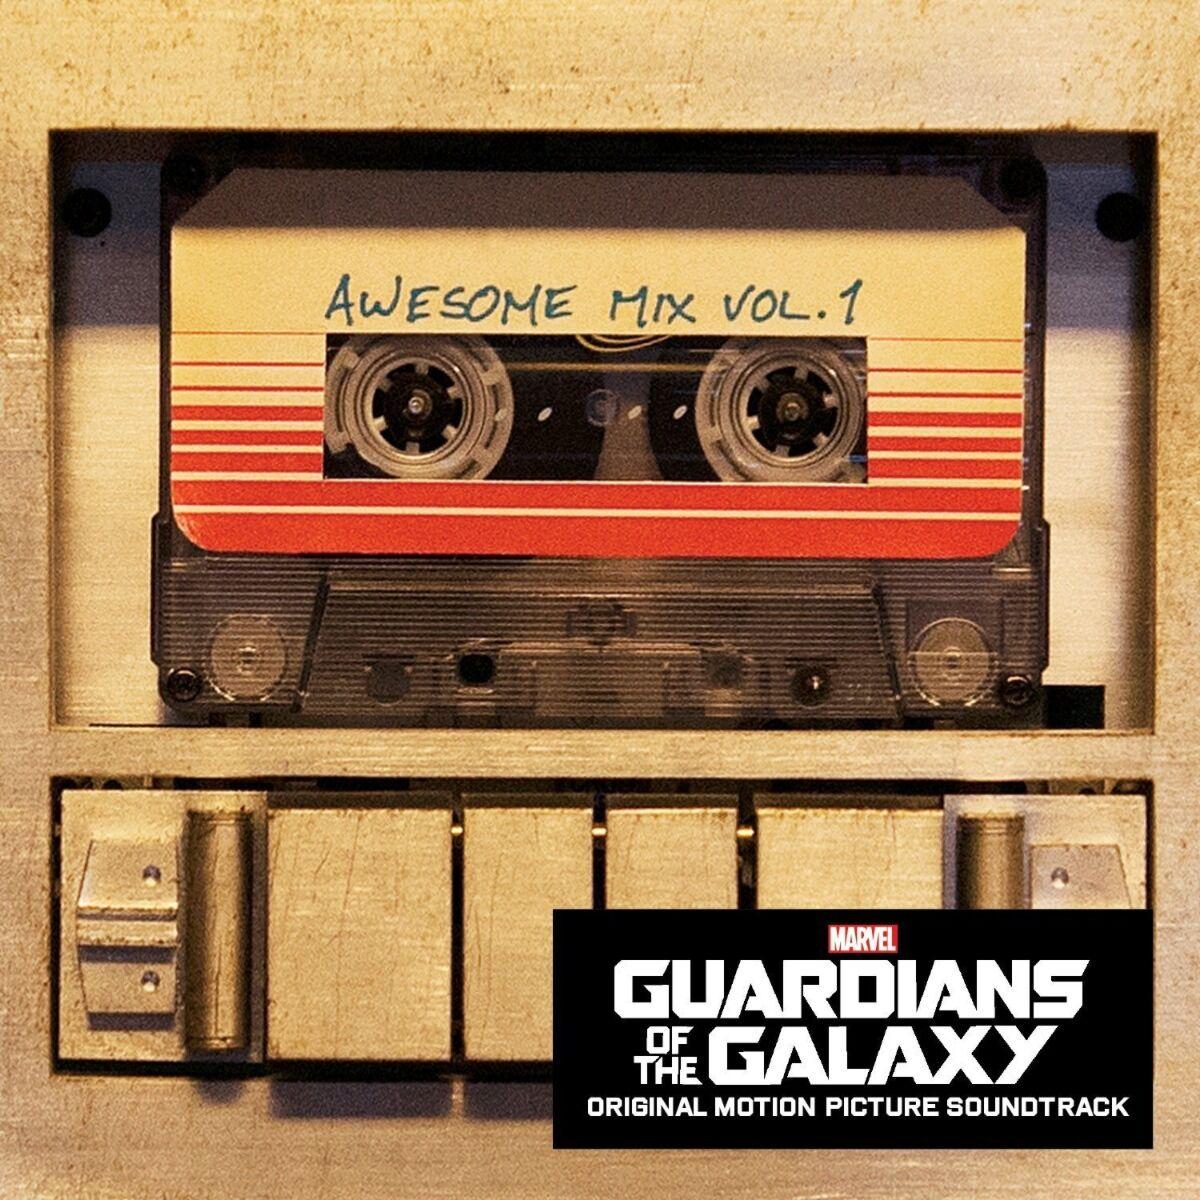 OST Guardians Of The Galaxy Awesome Mix Vol. 1 LP